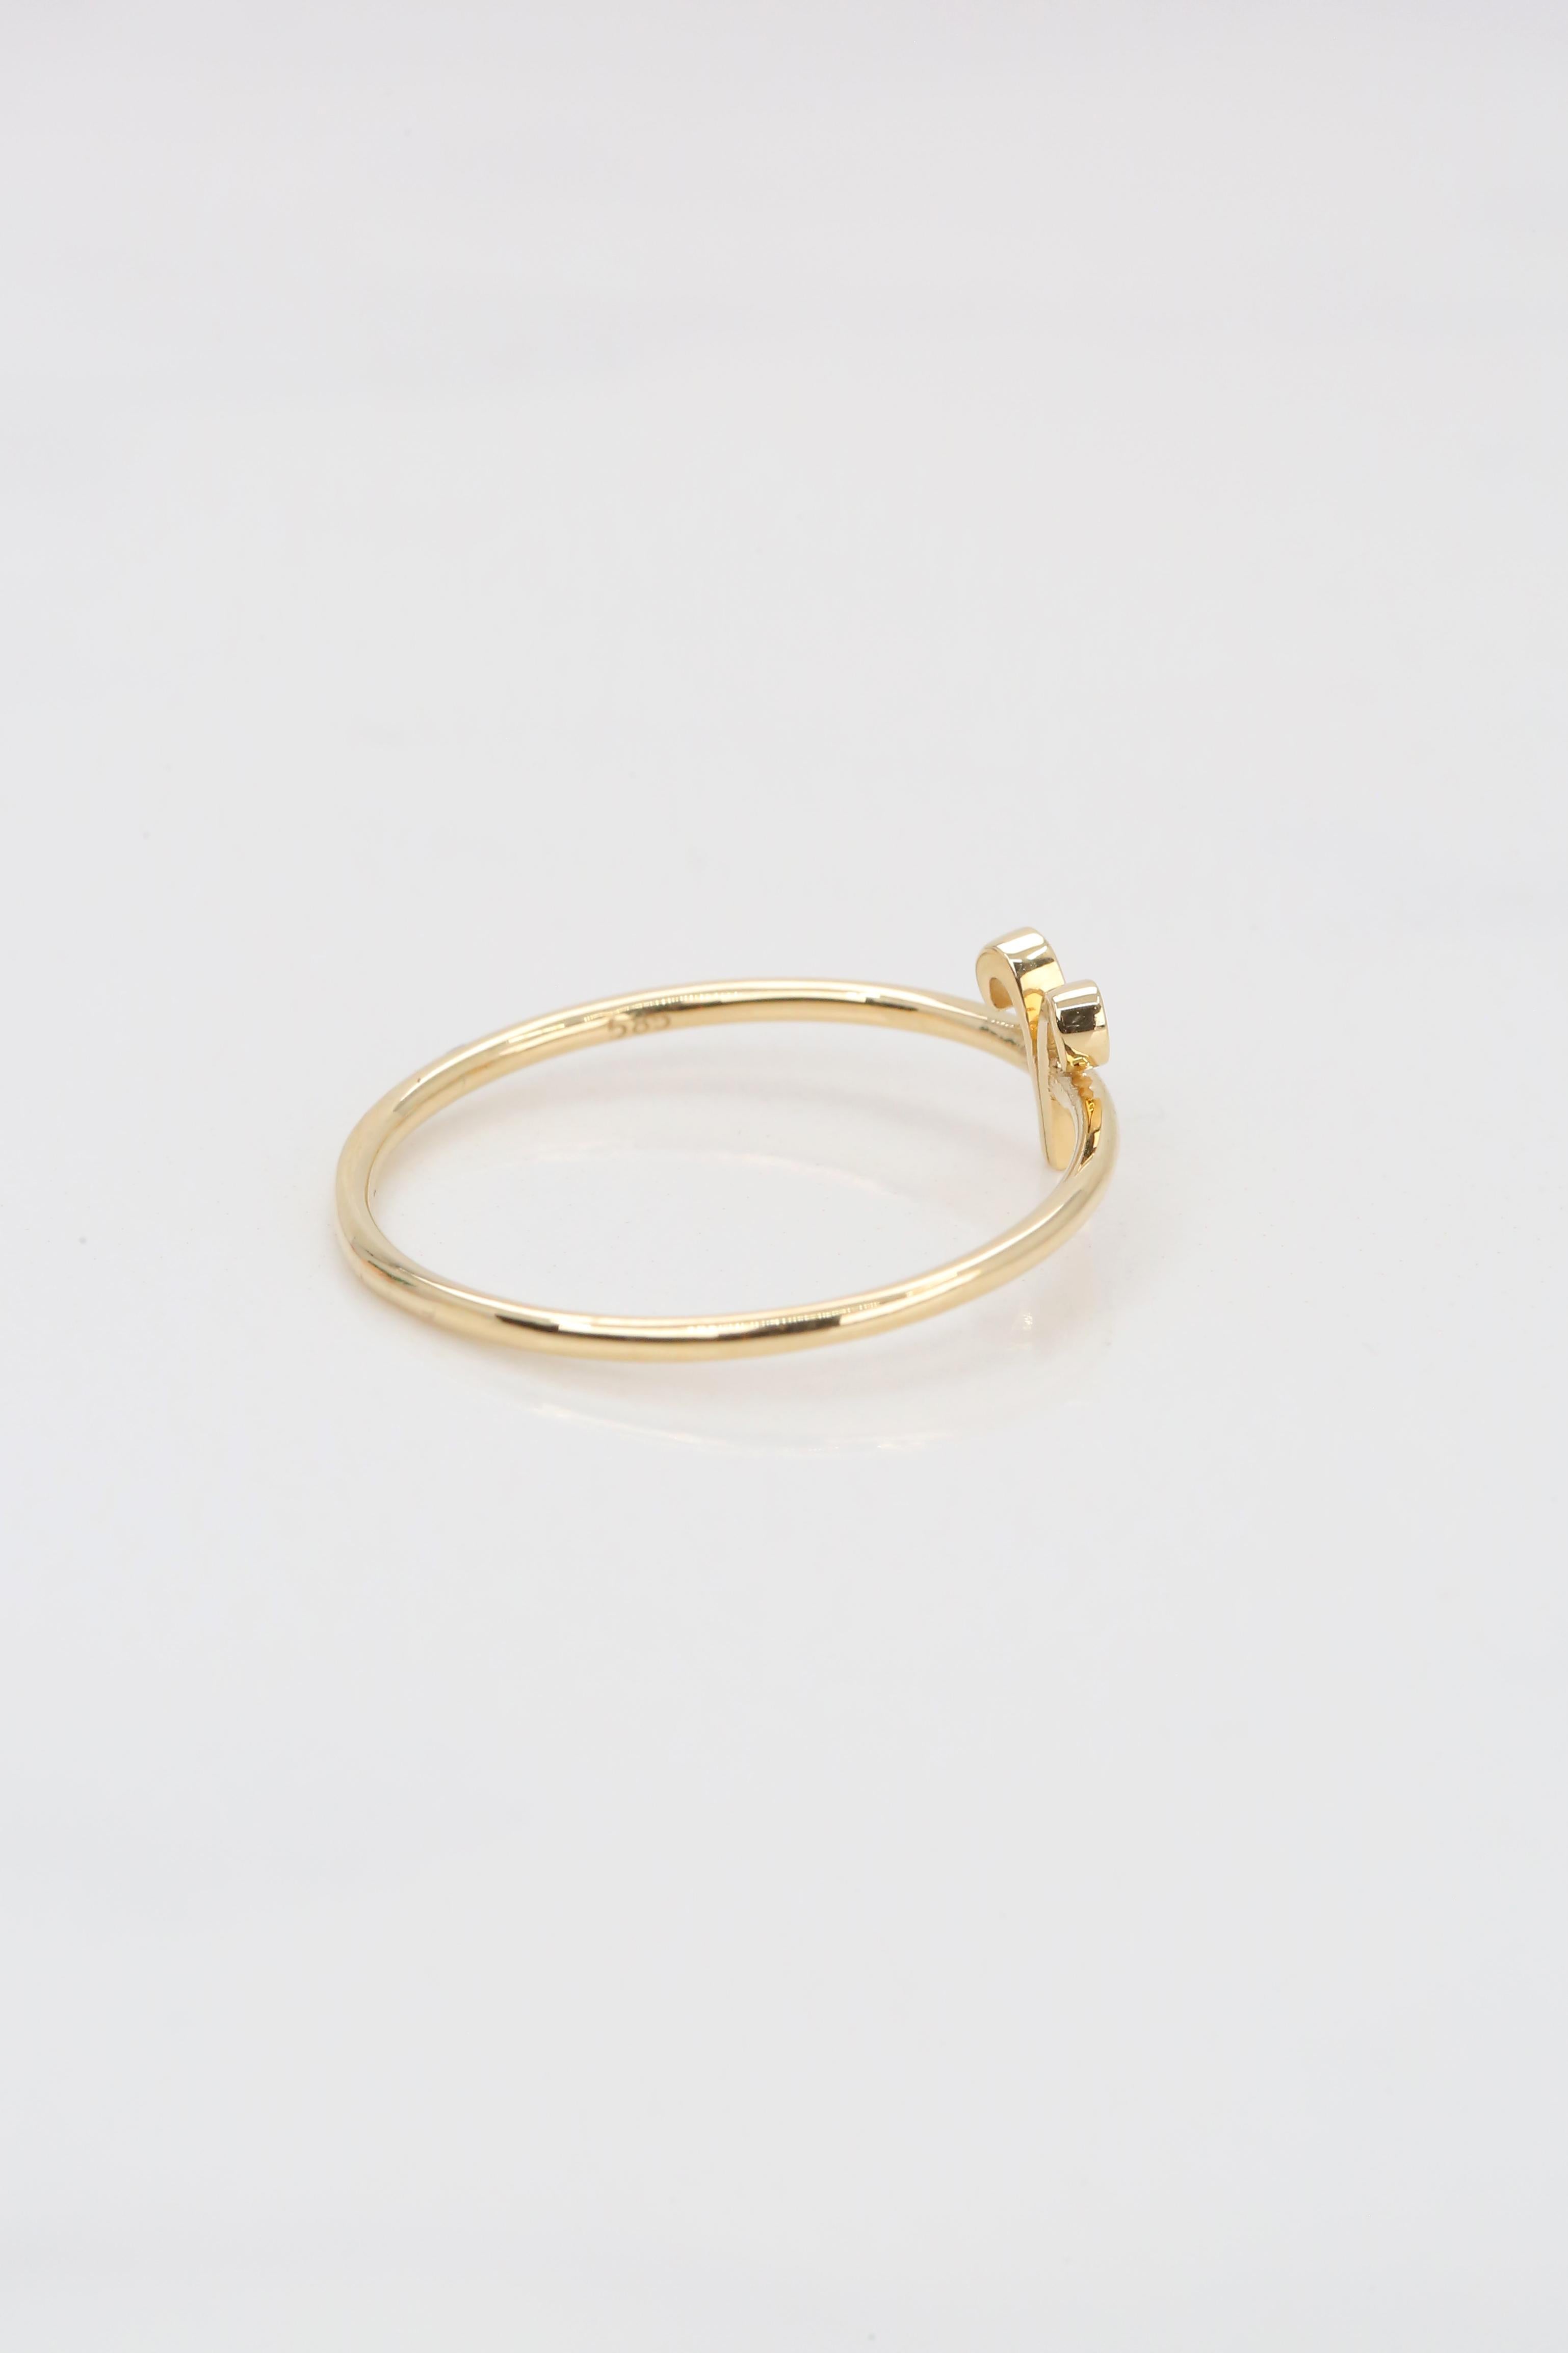 For Sale:  14K Gold Aries Zodiac Ring, Aries Sign Zodiac Ring 6